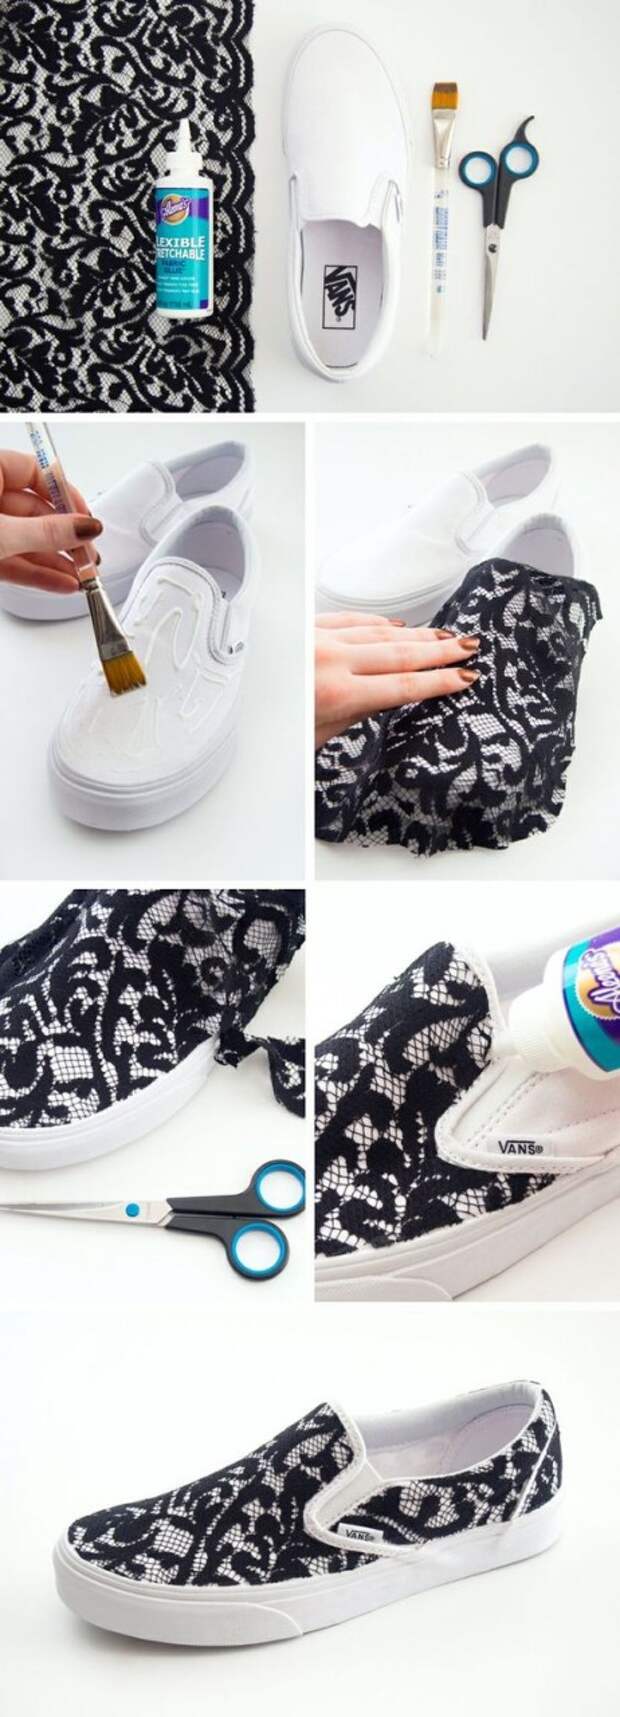 DIY Lace Slip-on Vans Sneakers. i think I would have to use a fabric knife, not scissors. I am horrible at cutting neatly with scissors.: 